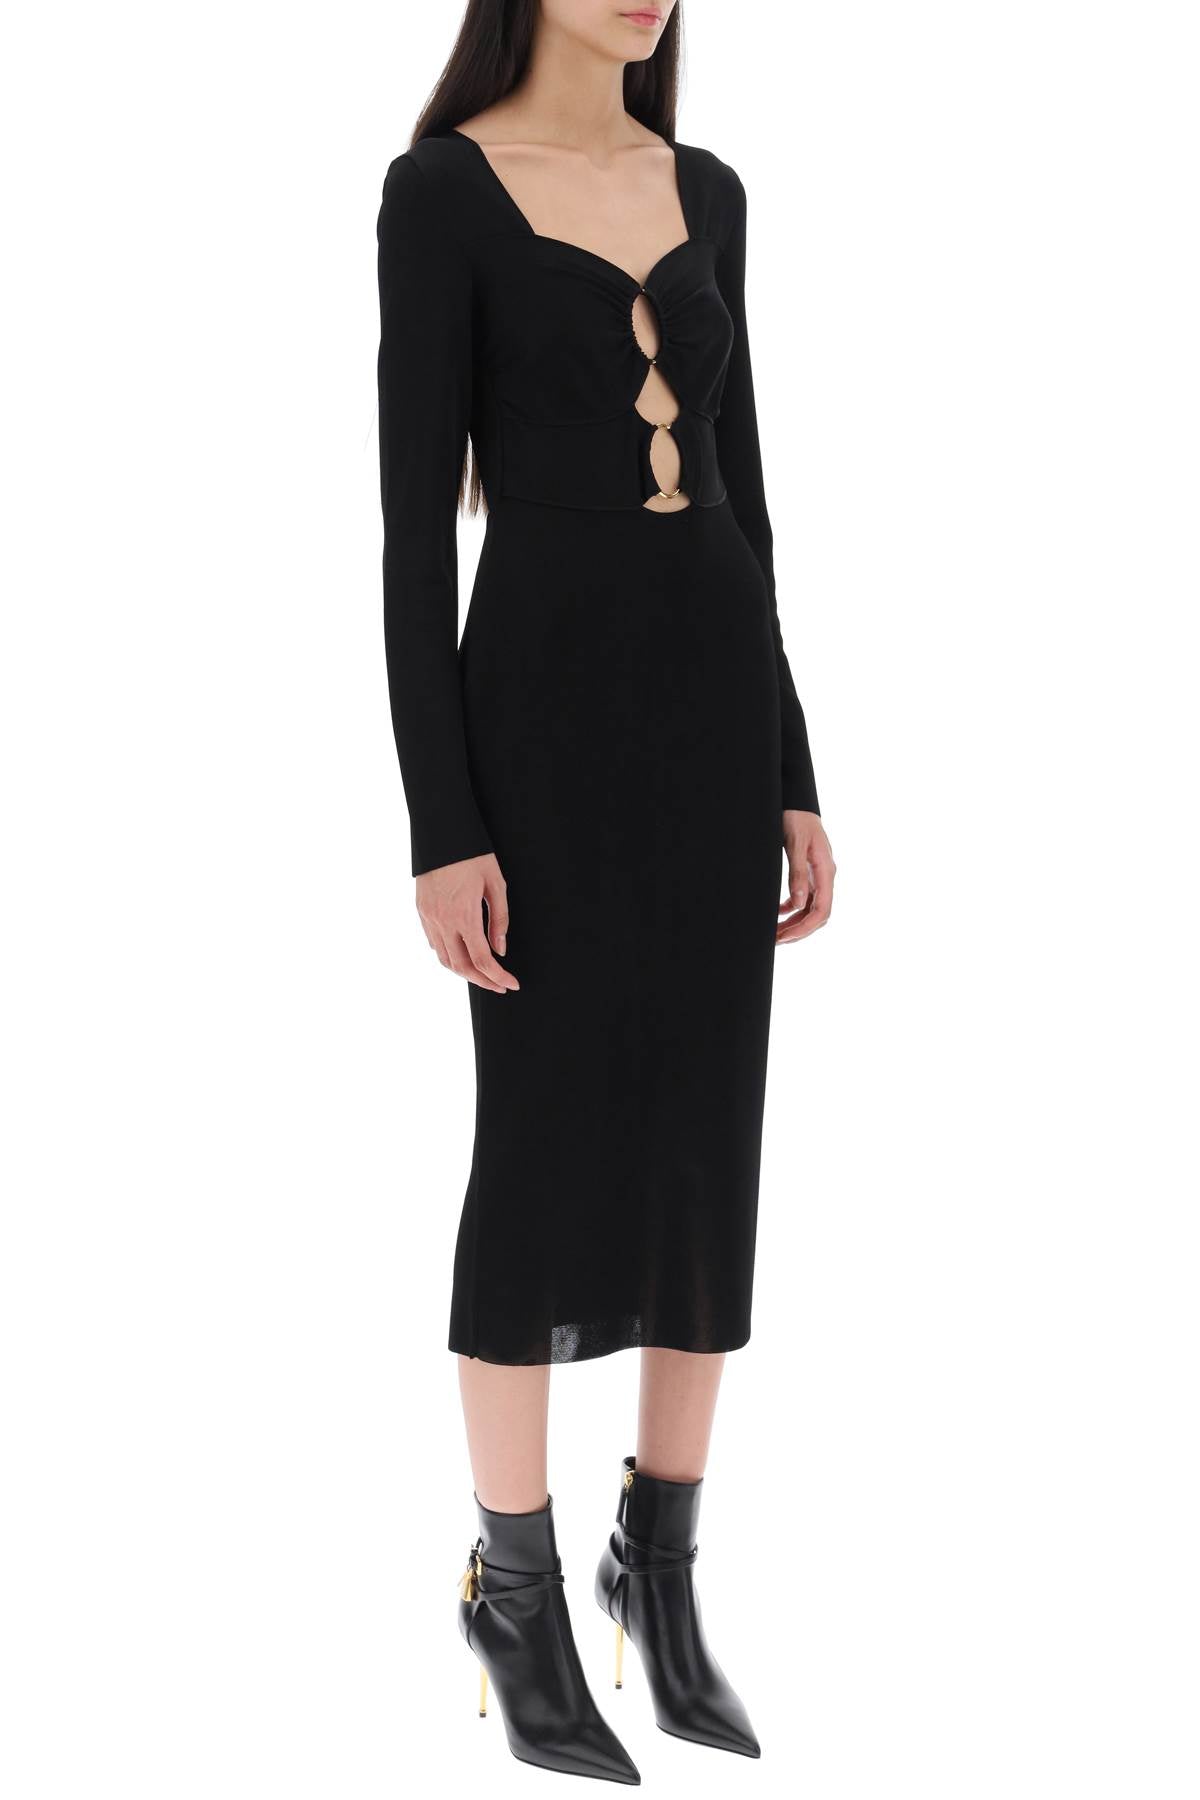 Tom ford knitted midi dress with cut-outs-1